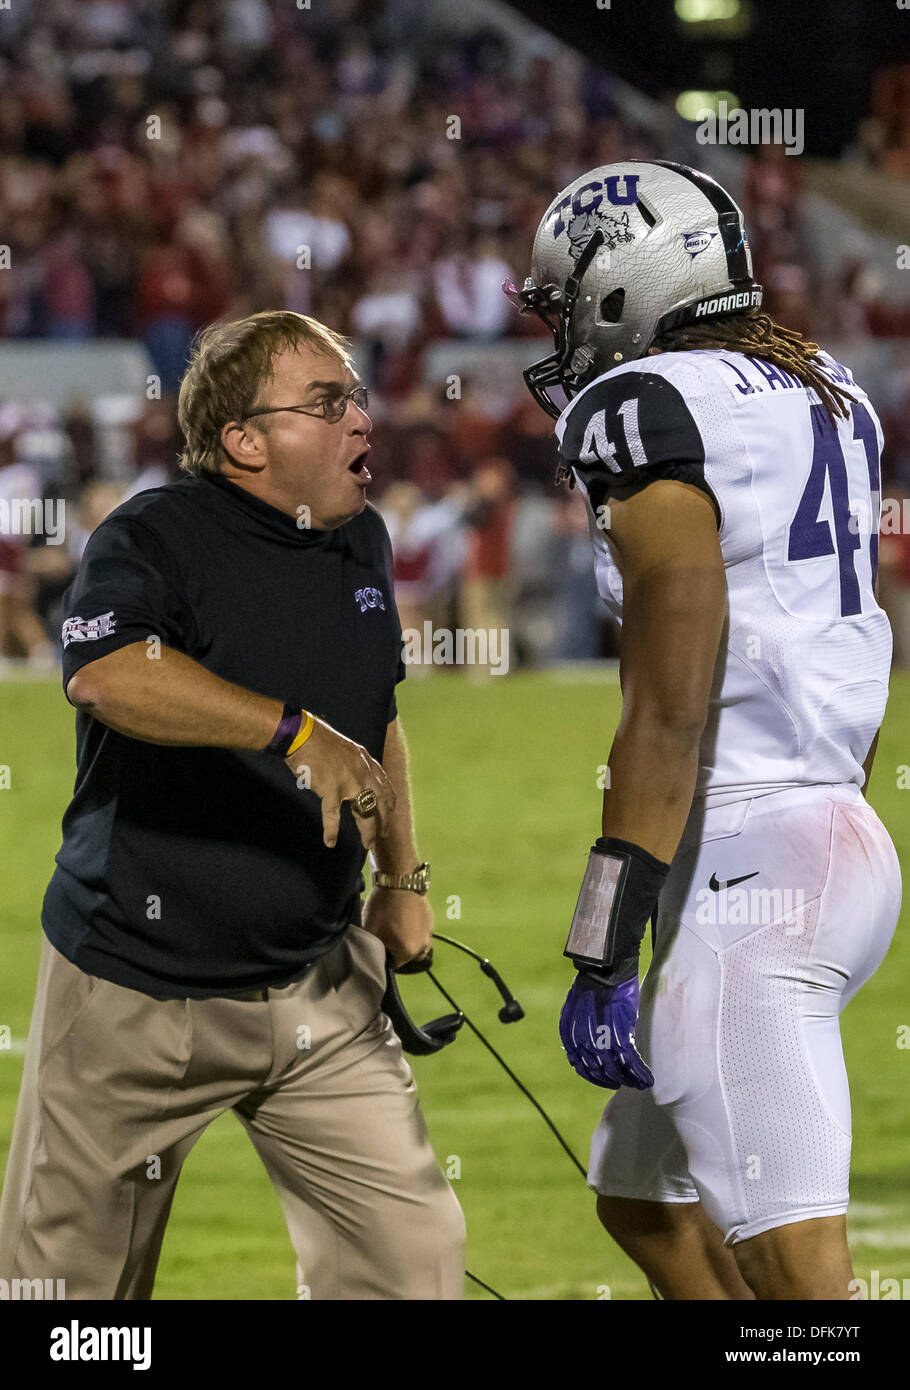 Norman, Oklahoma, USA. 5th Oct, 2013. October 5, 2103: TCU Horned Frogs head coach Gary Patterson talks with TCU Horned Frogs linebacker Jonathan Anderson (41) during the NCAA football game between the TCU Horned Frogs and the Oklahoma Sooners at Gaylord Family - Oklahoma Memorial Stadium in Norman, OK. © csm/Alamy Live News Stock Photo